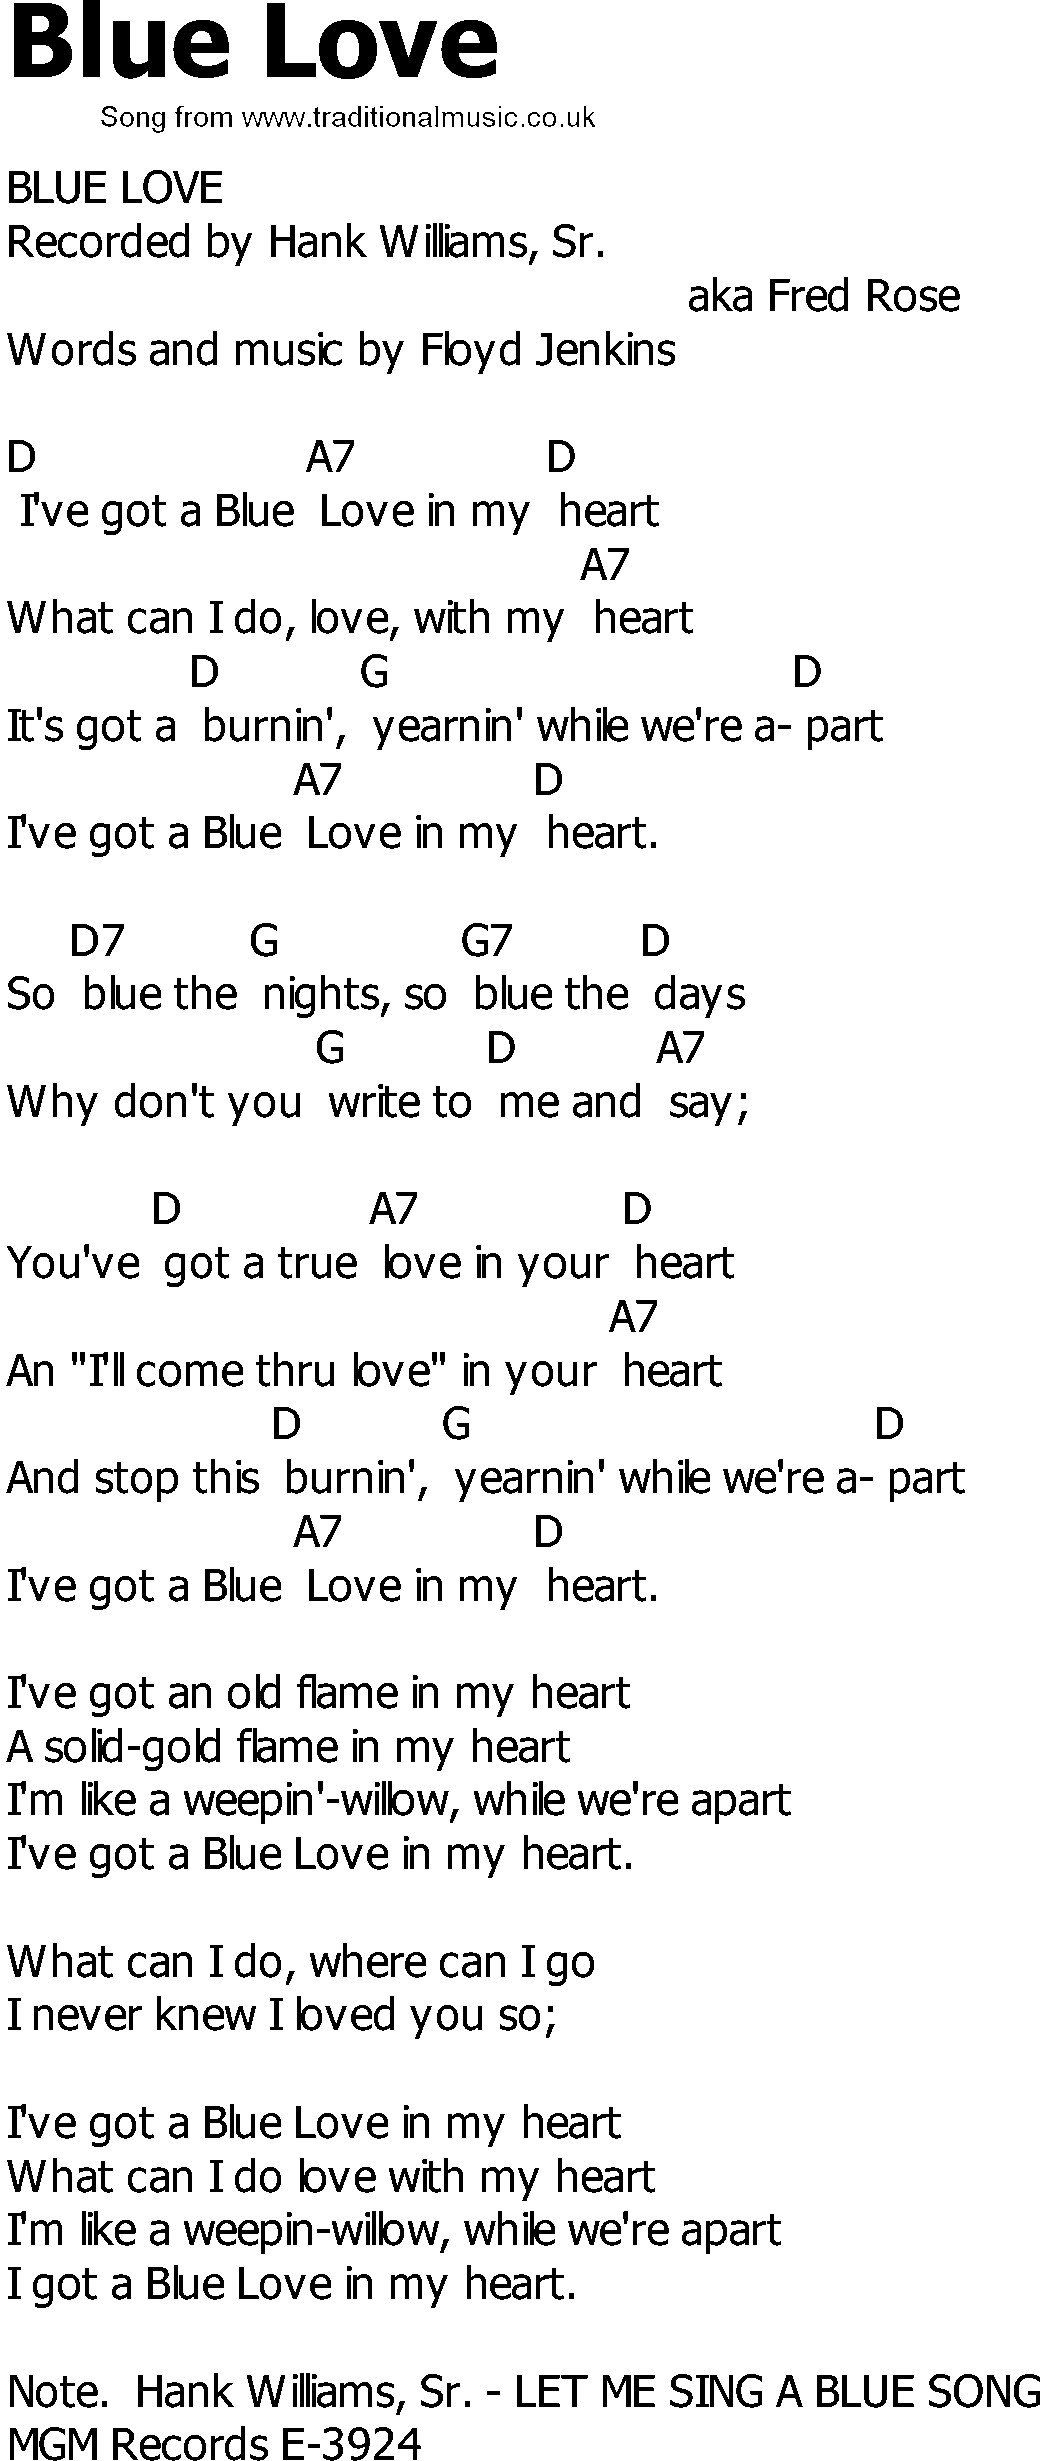 Old Country song lyrics with chords - Blue Love